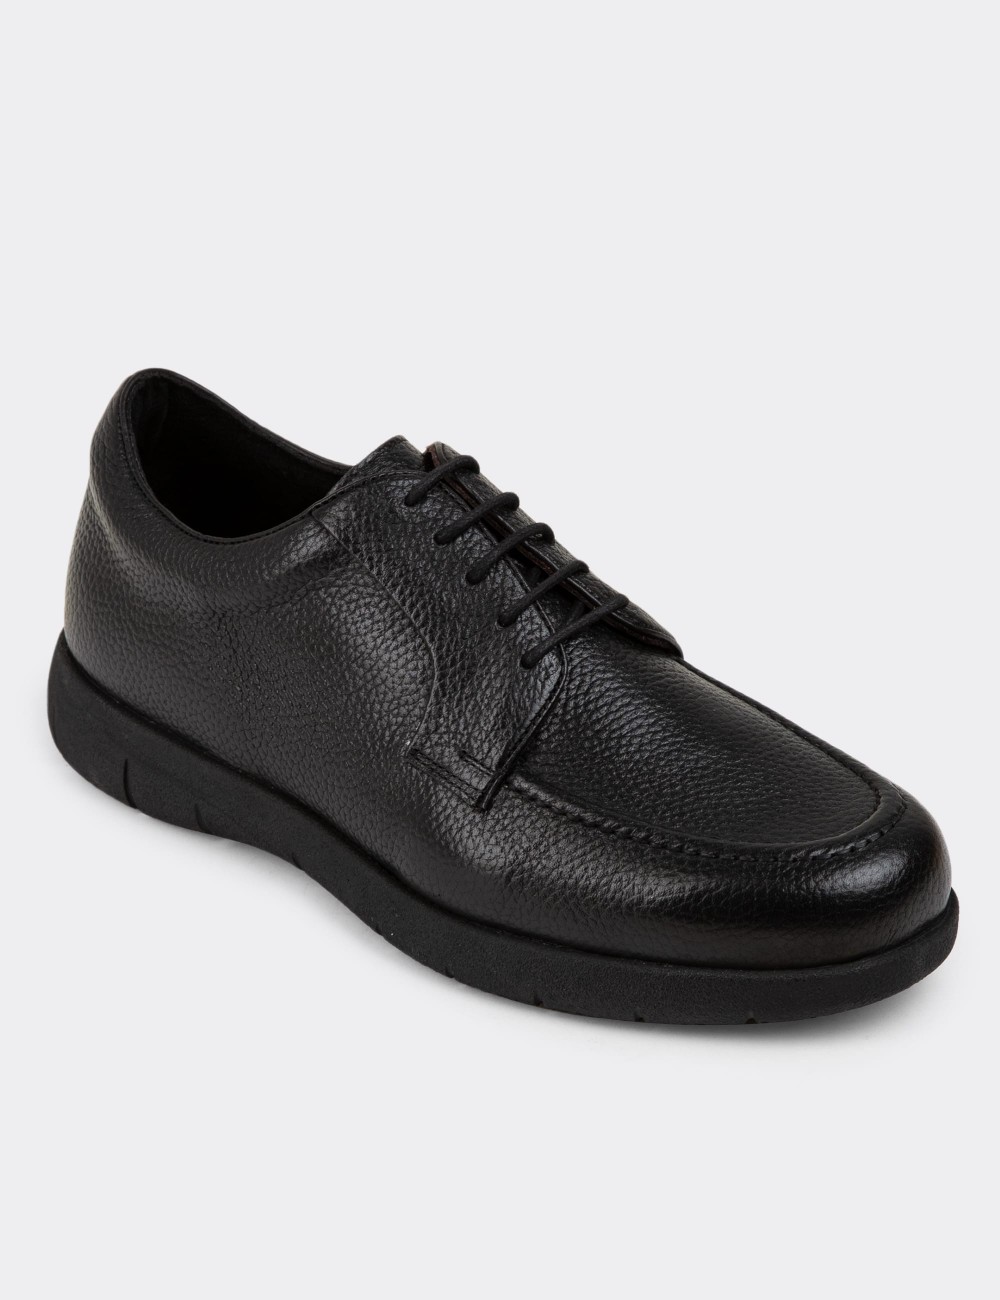 Black Leather Lace-up Shoes - 01930MSYHC02